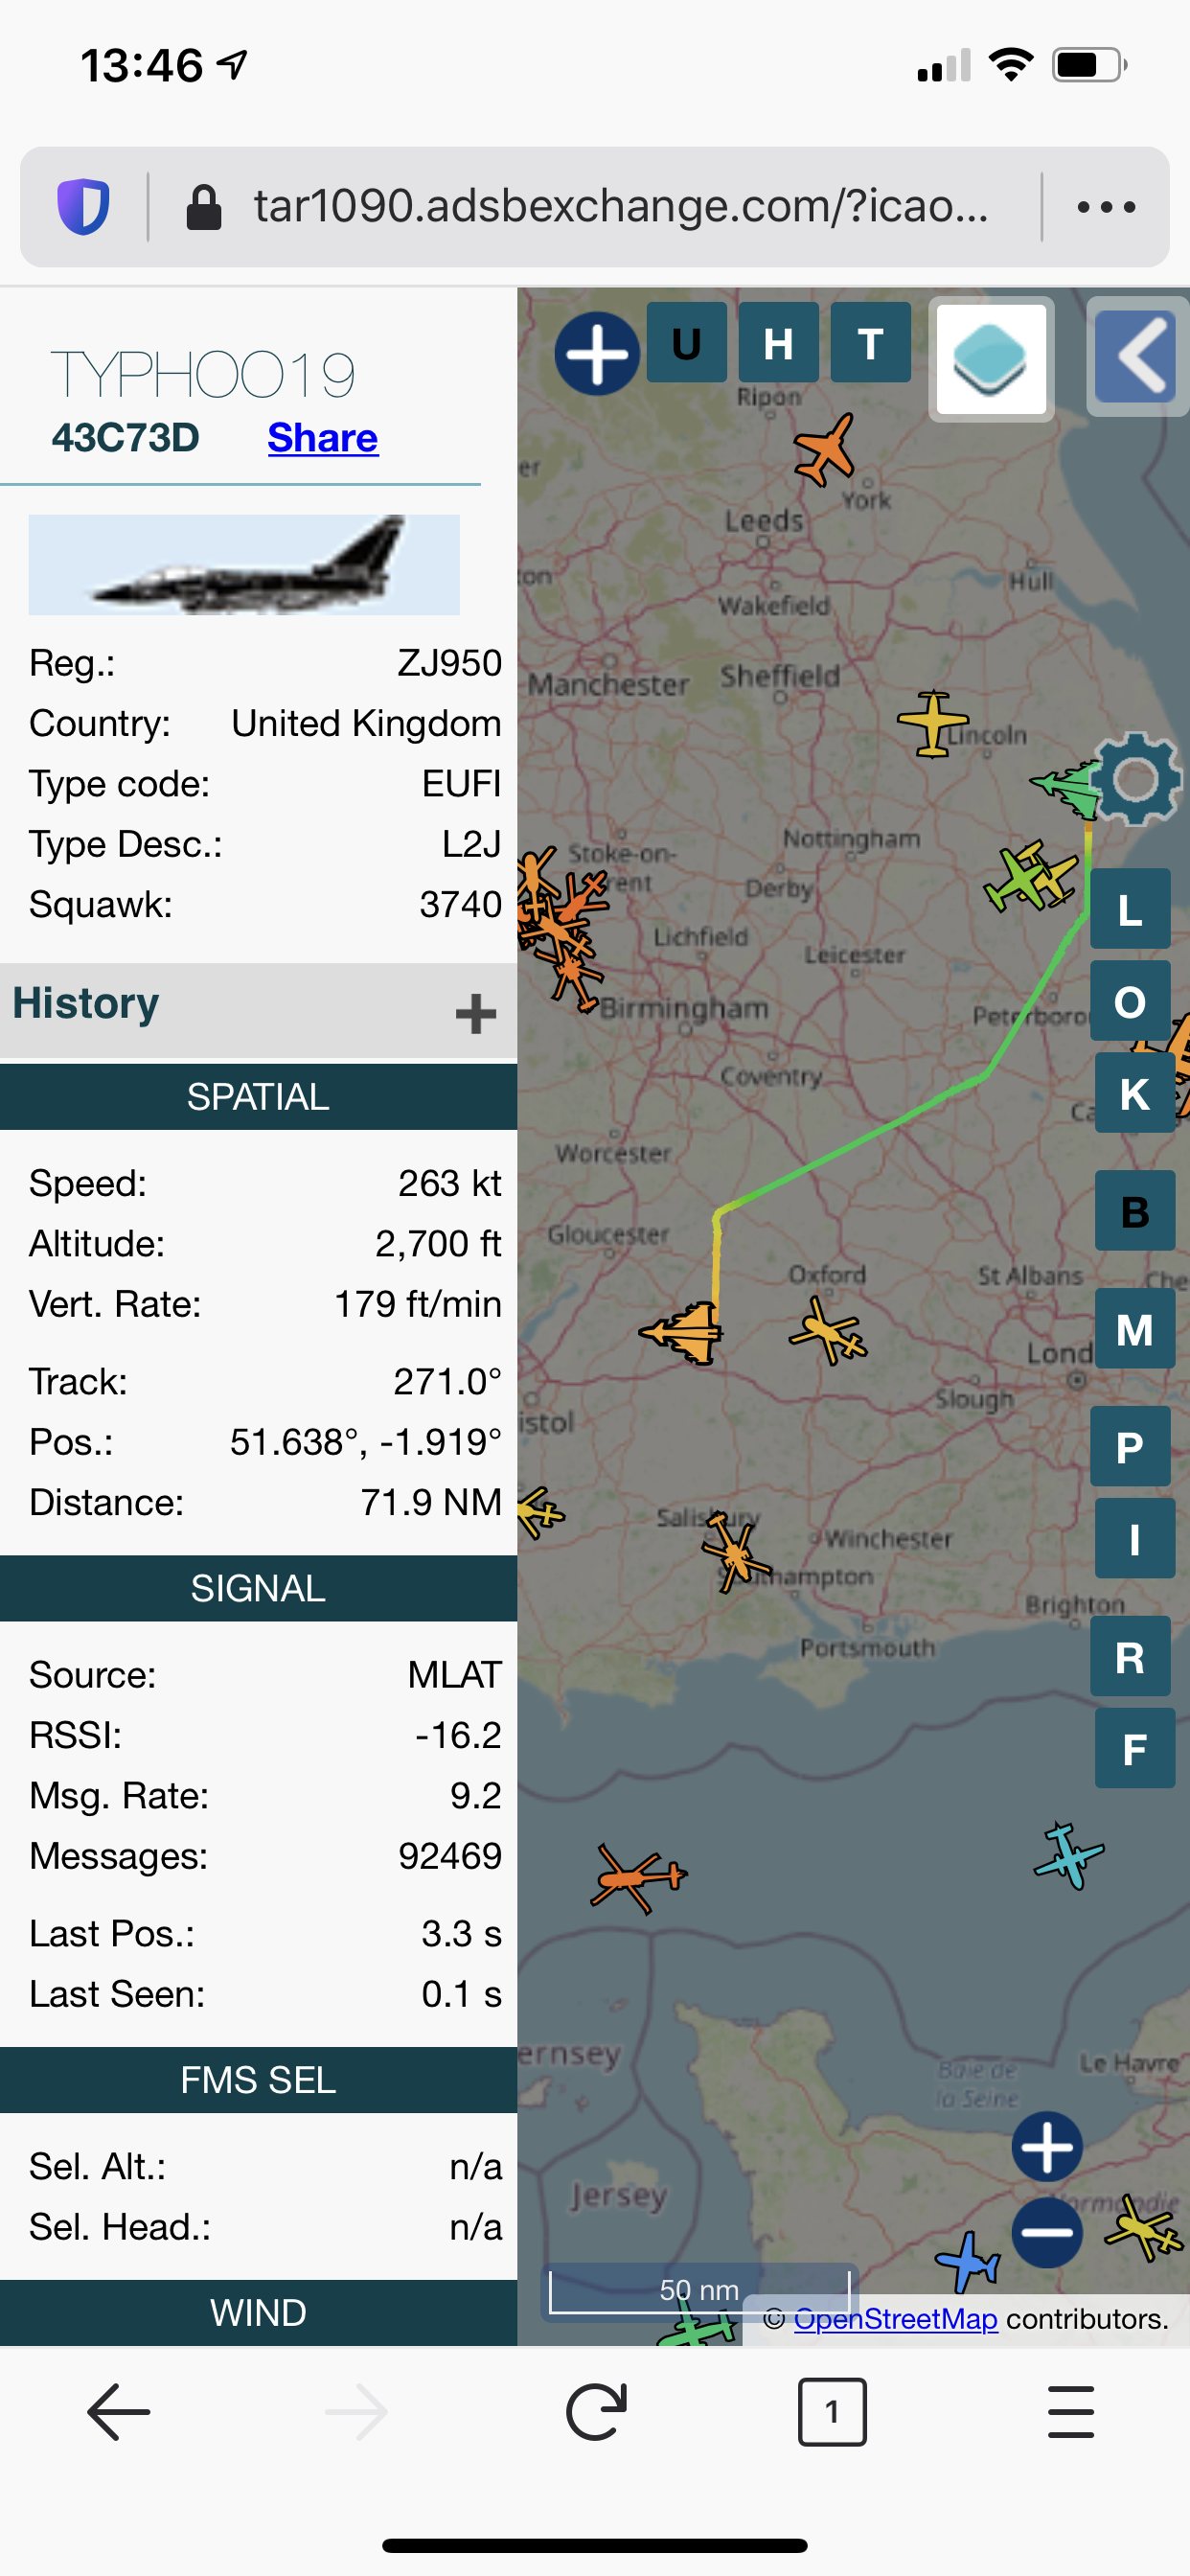 Cool things seen on FlightRadar - Page 169 - Boats, Planes & Trains - PistonHeads